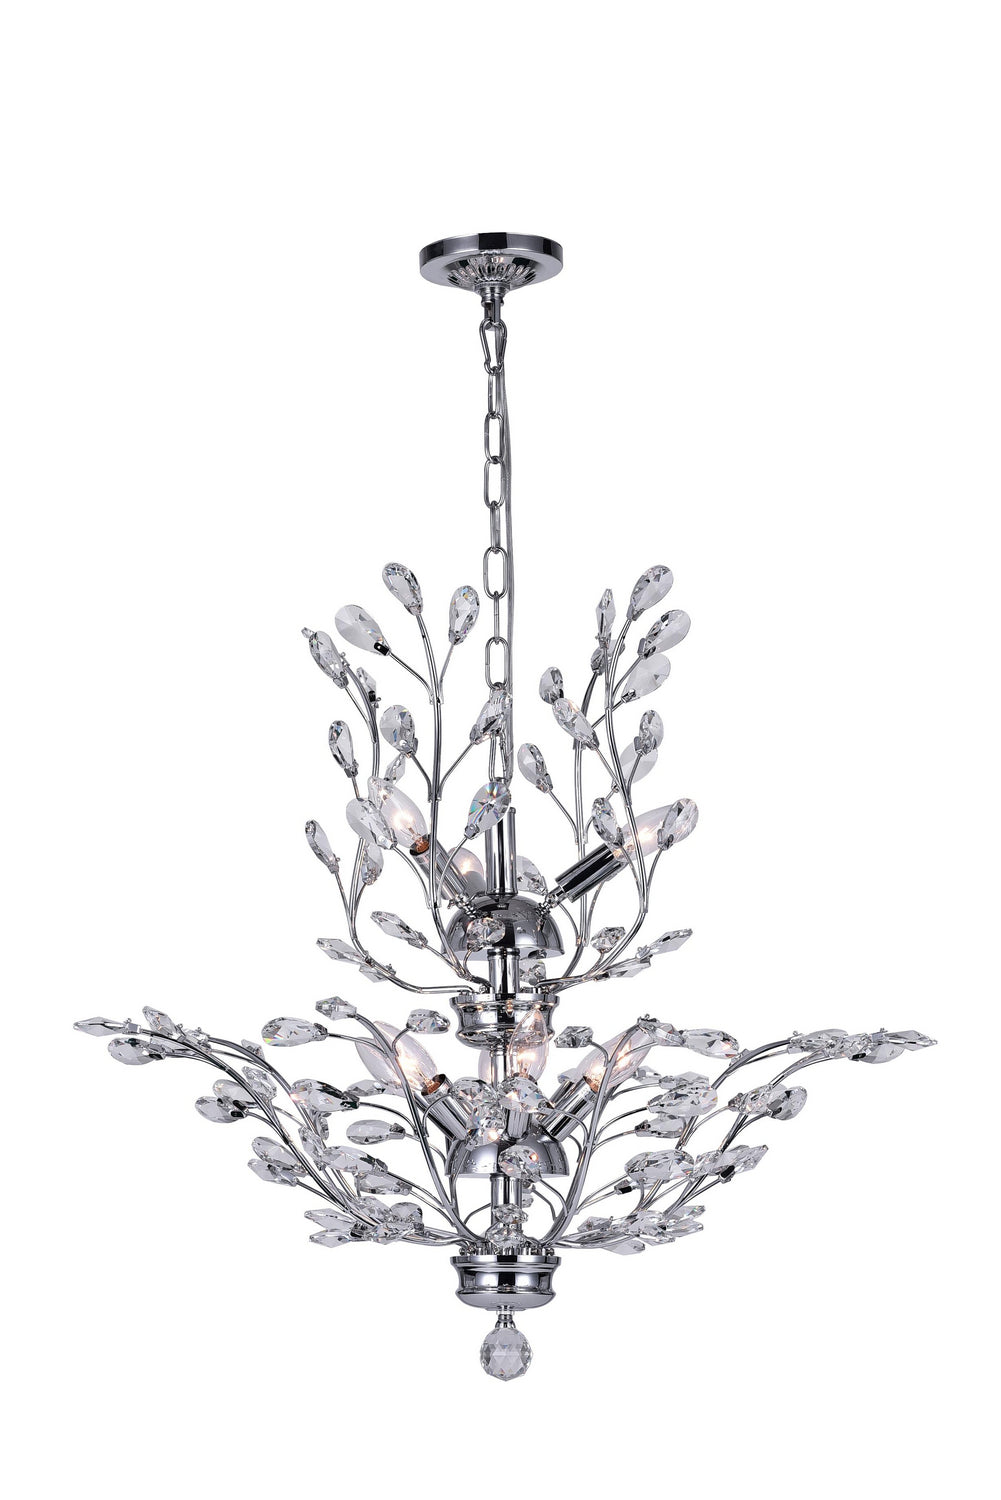 CWI Lighting Nine Light Chandelier from the Ivy collection in Chrome finish